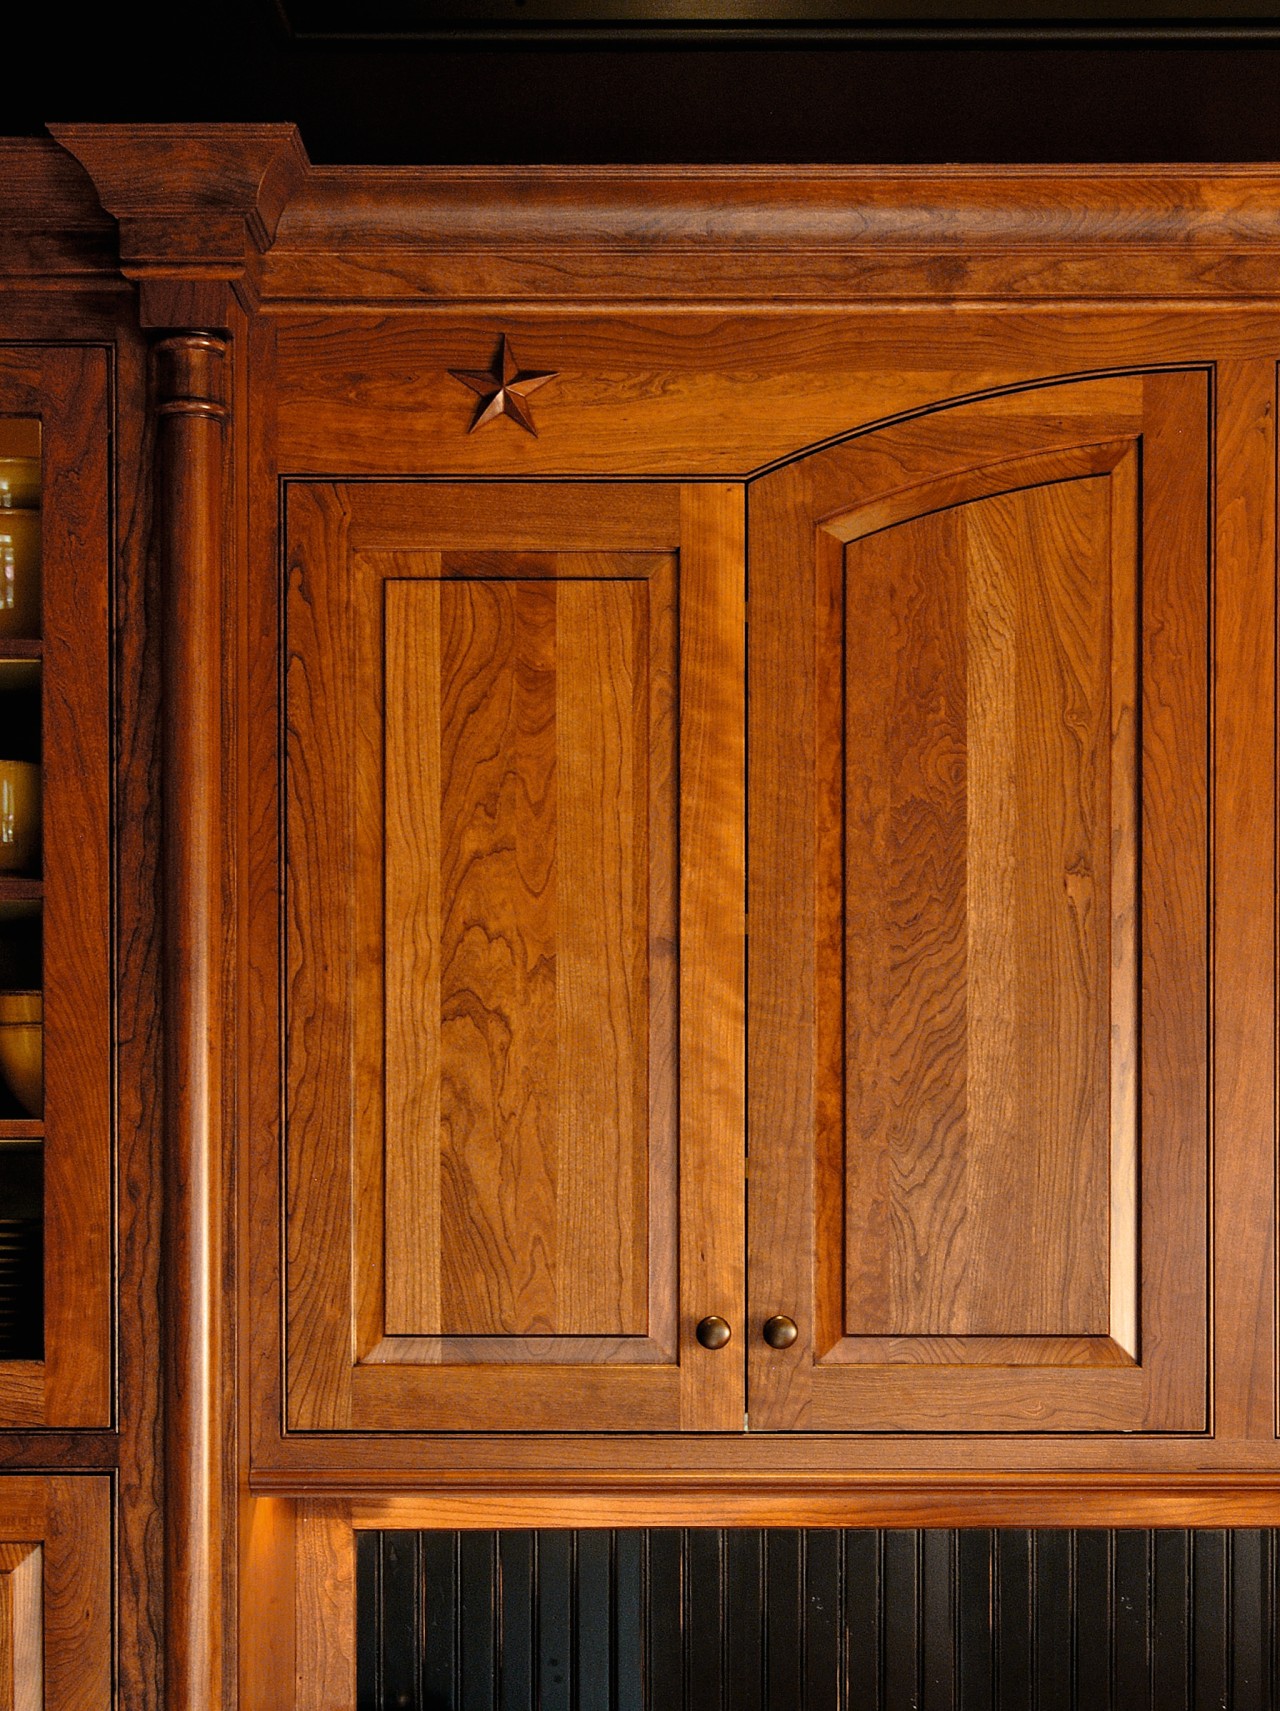 Close up view of some wooden cabinetry. cabinetry, cupboard, door, furniture, hardwood, wood, wood stain, brown